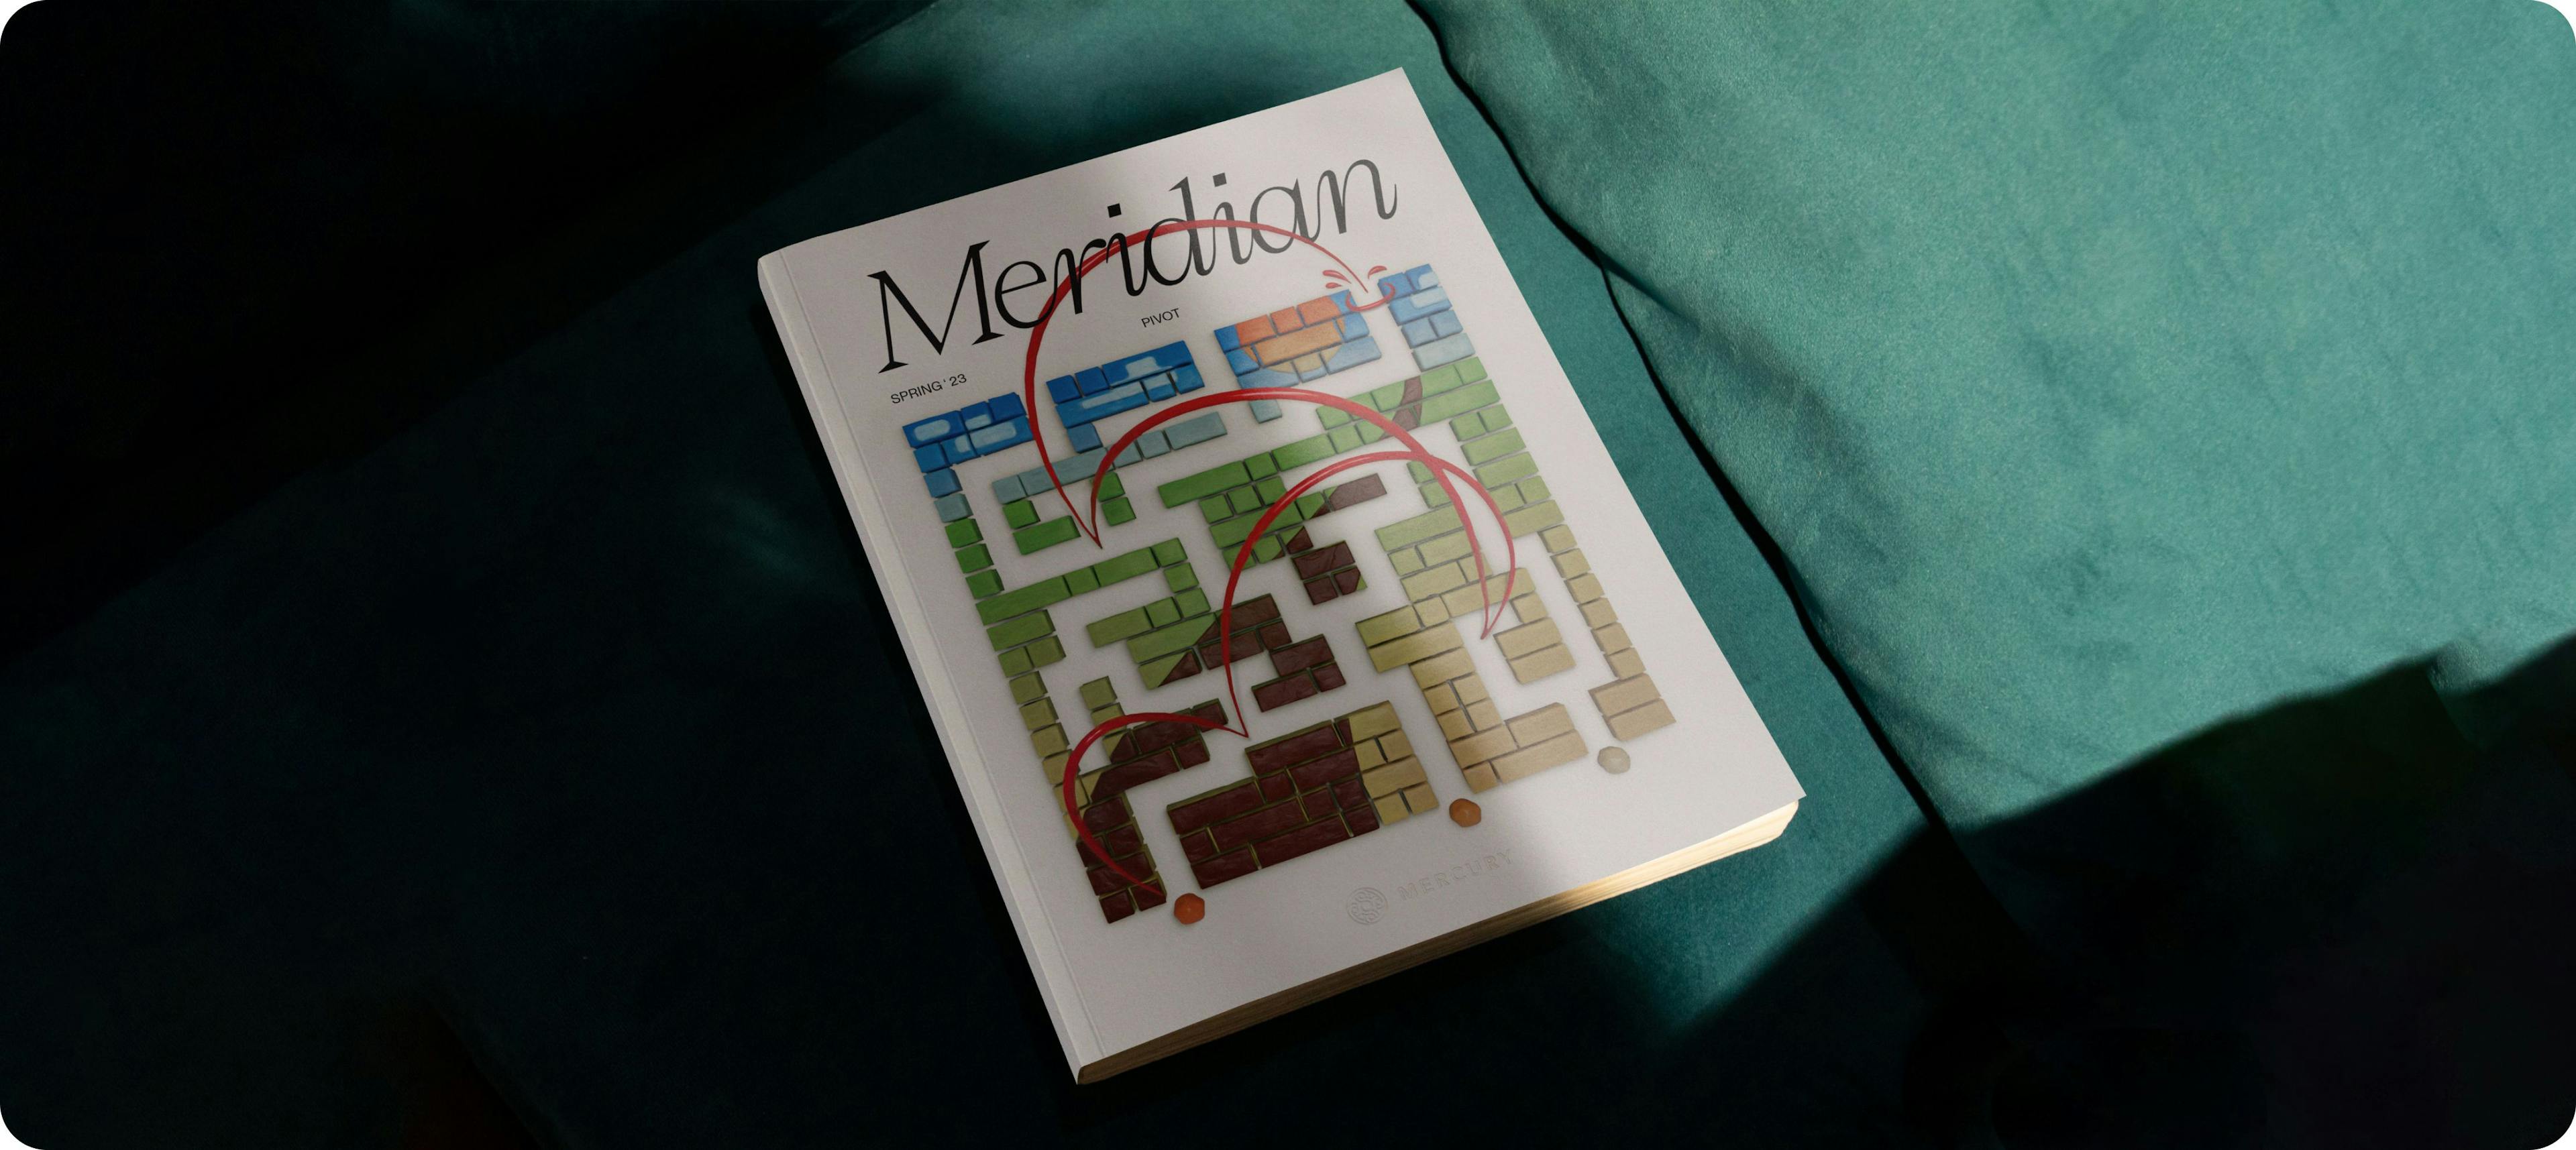 Introducing "Pivot," the first print issue of Meridian magazine